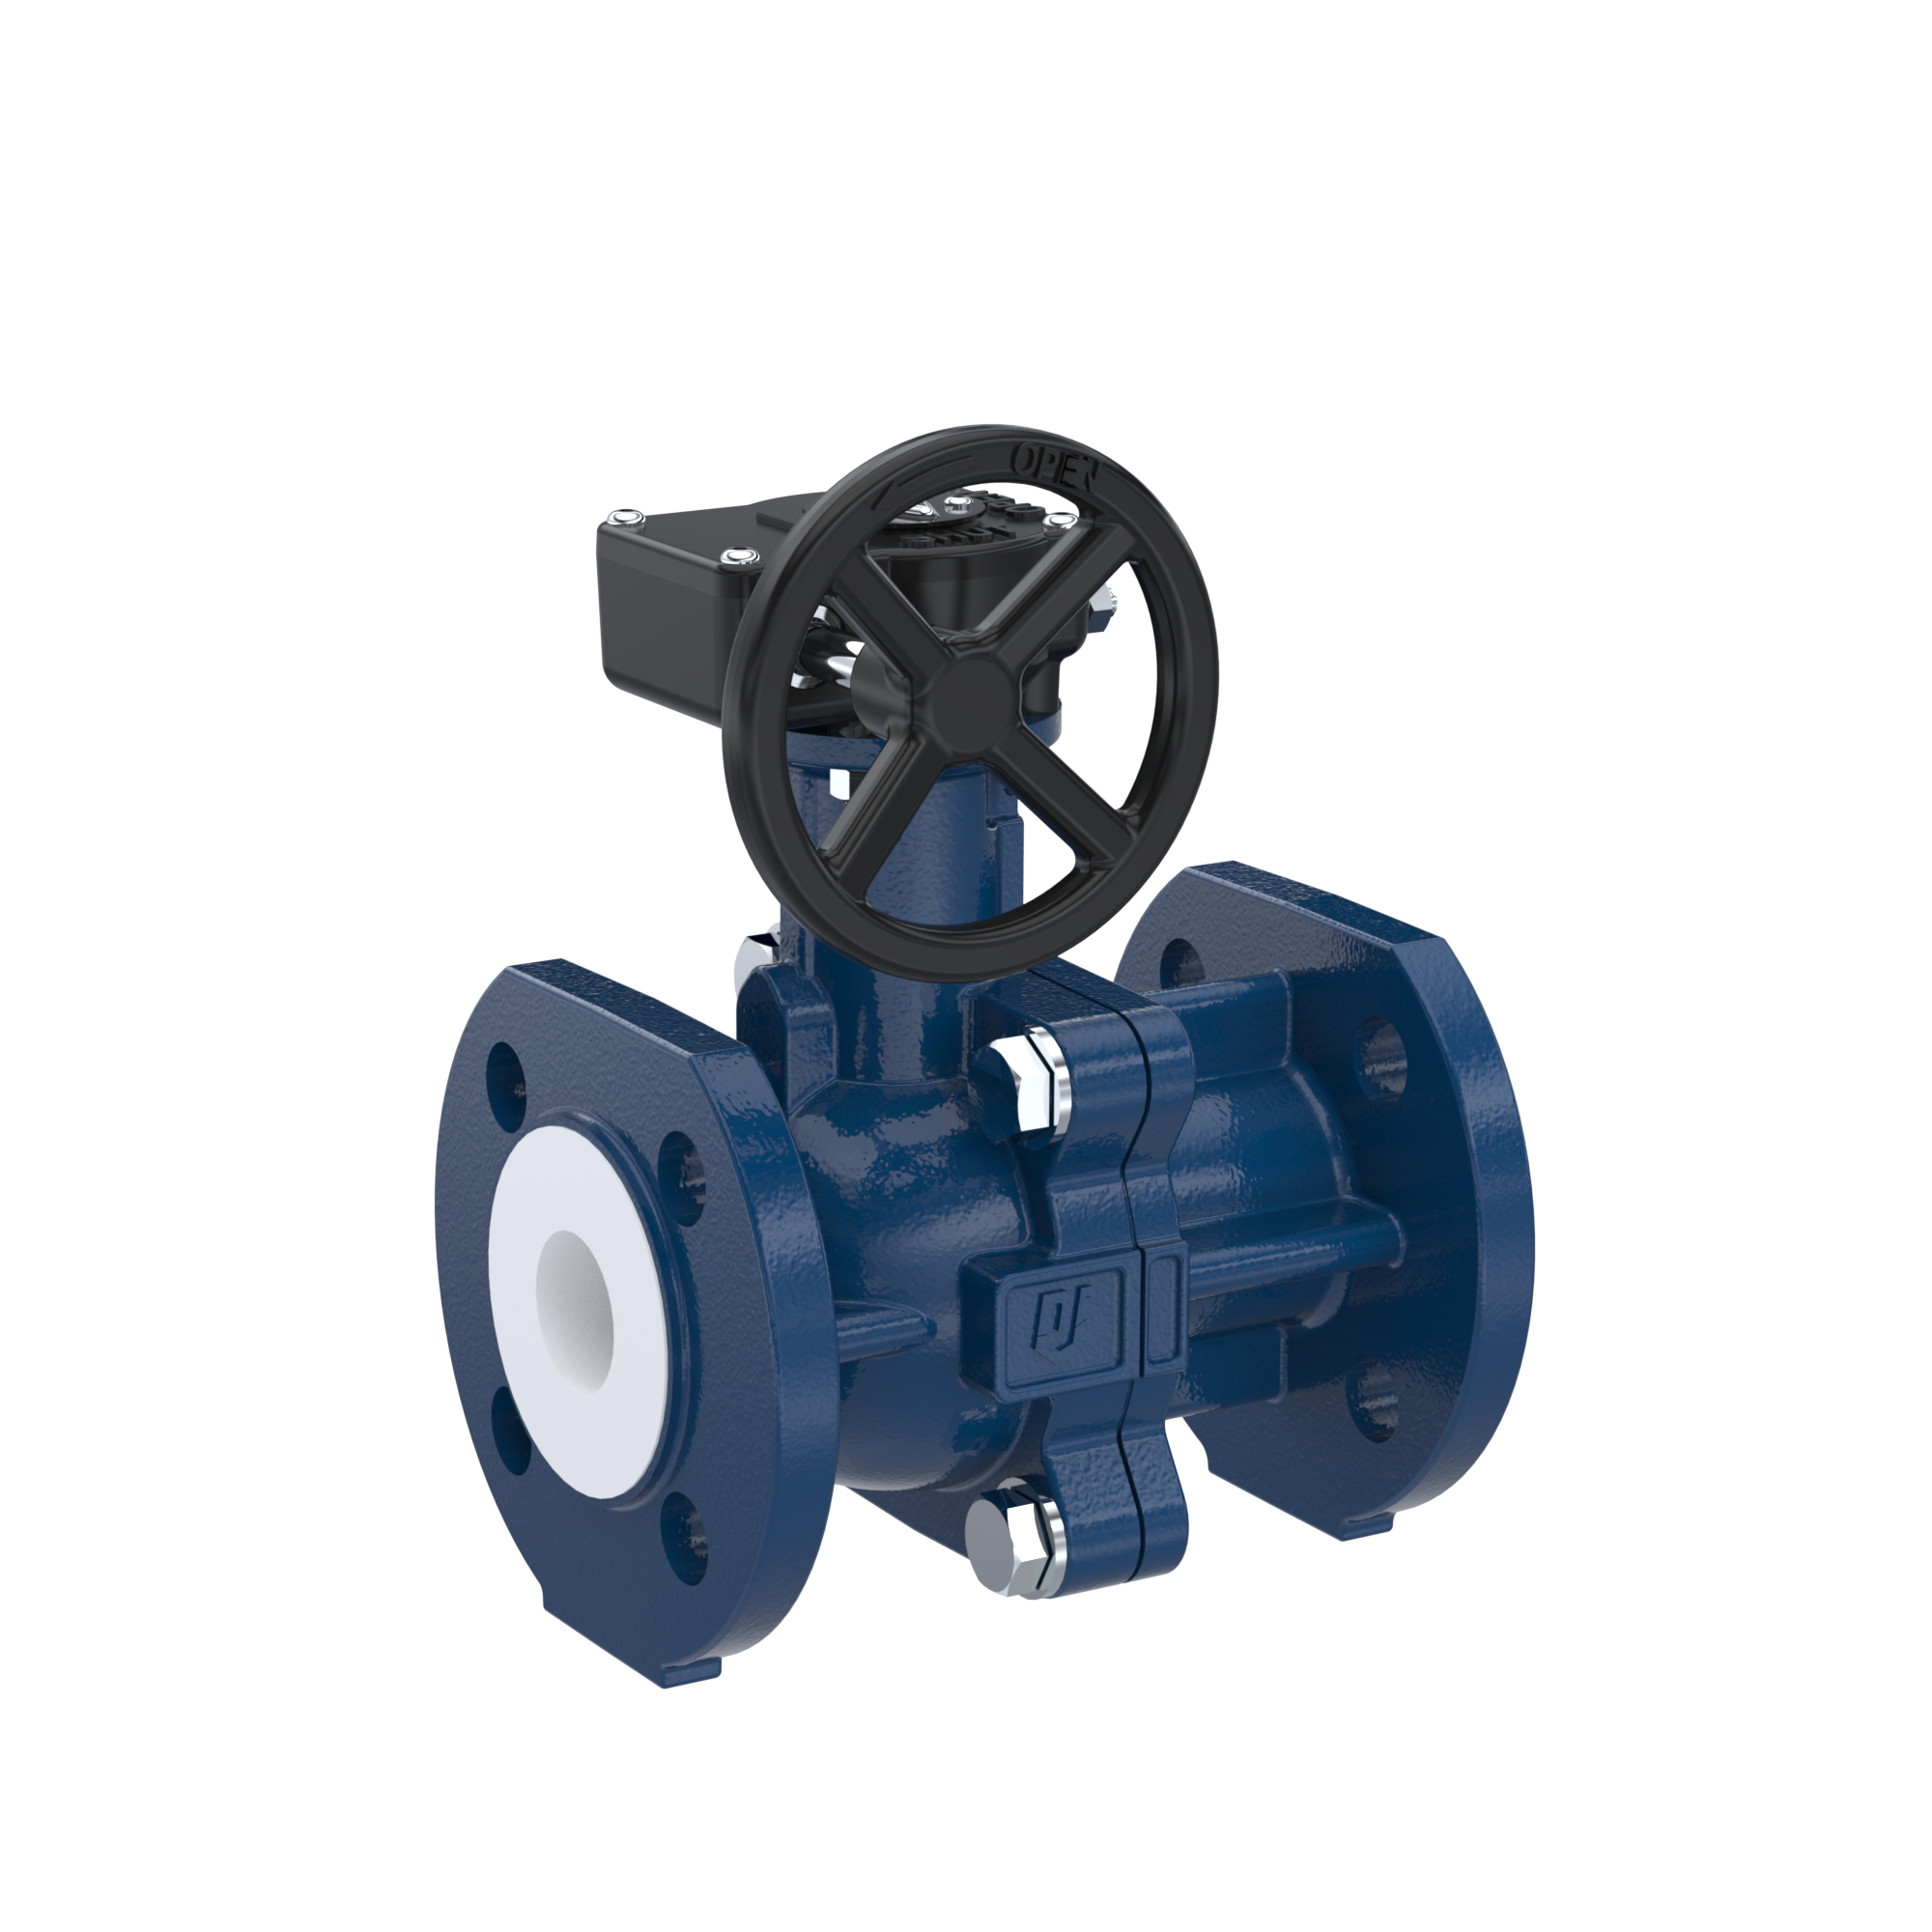 PFA-flange ball valve FK13 DN15 - 1/2" inch PN10/16 made of spheroidal graphite cast iron with worm gear